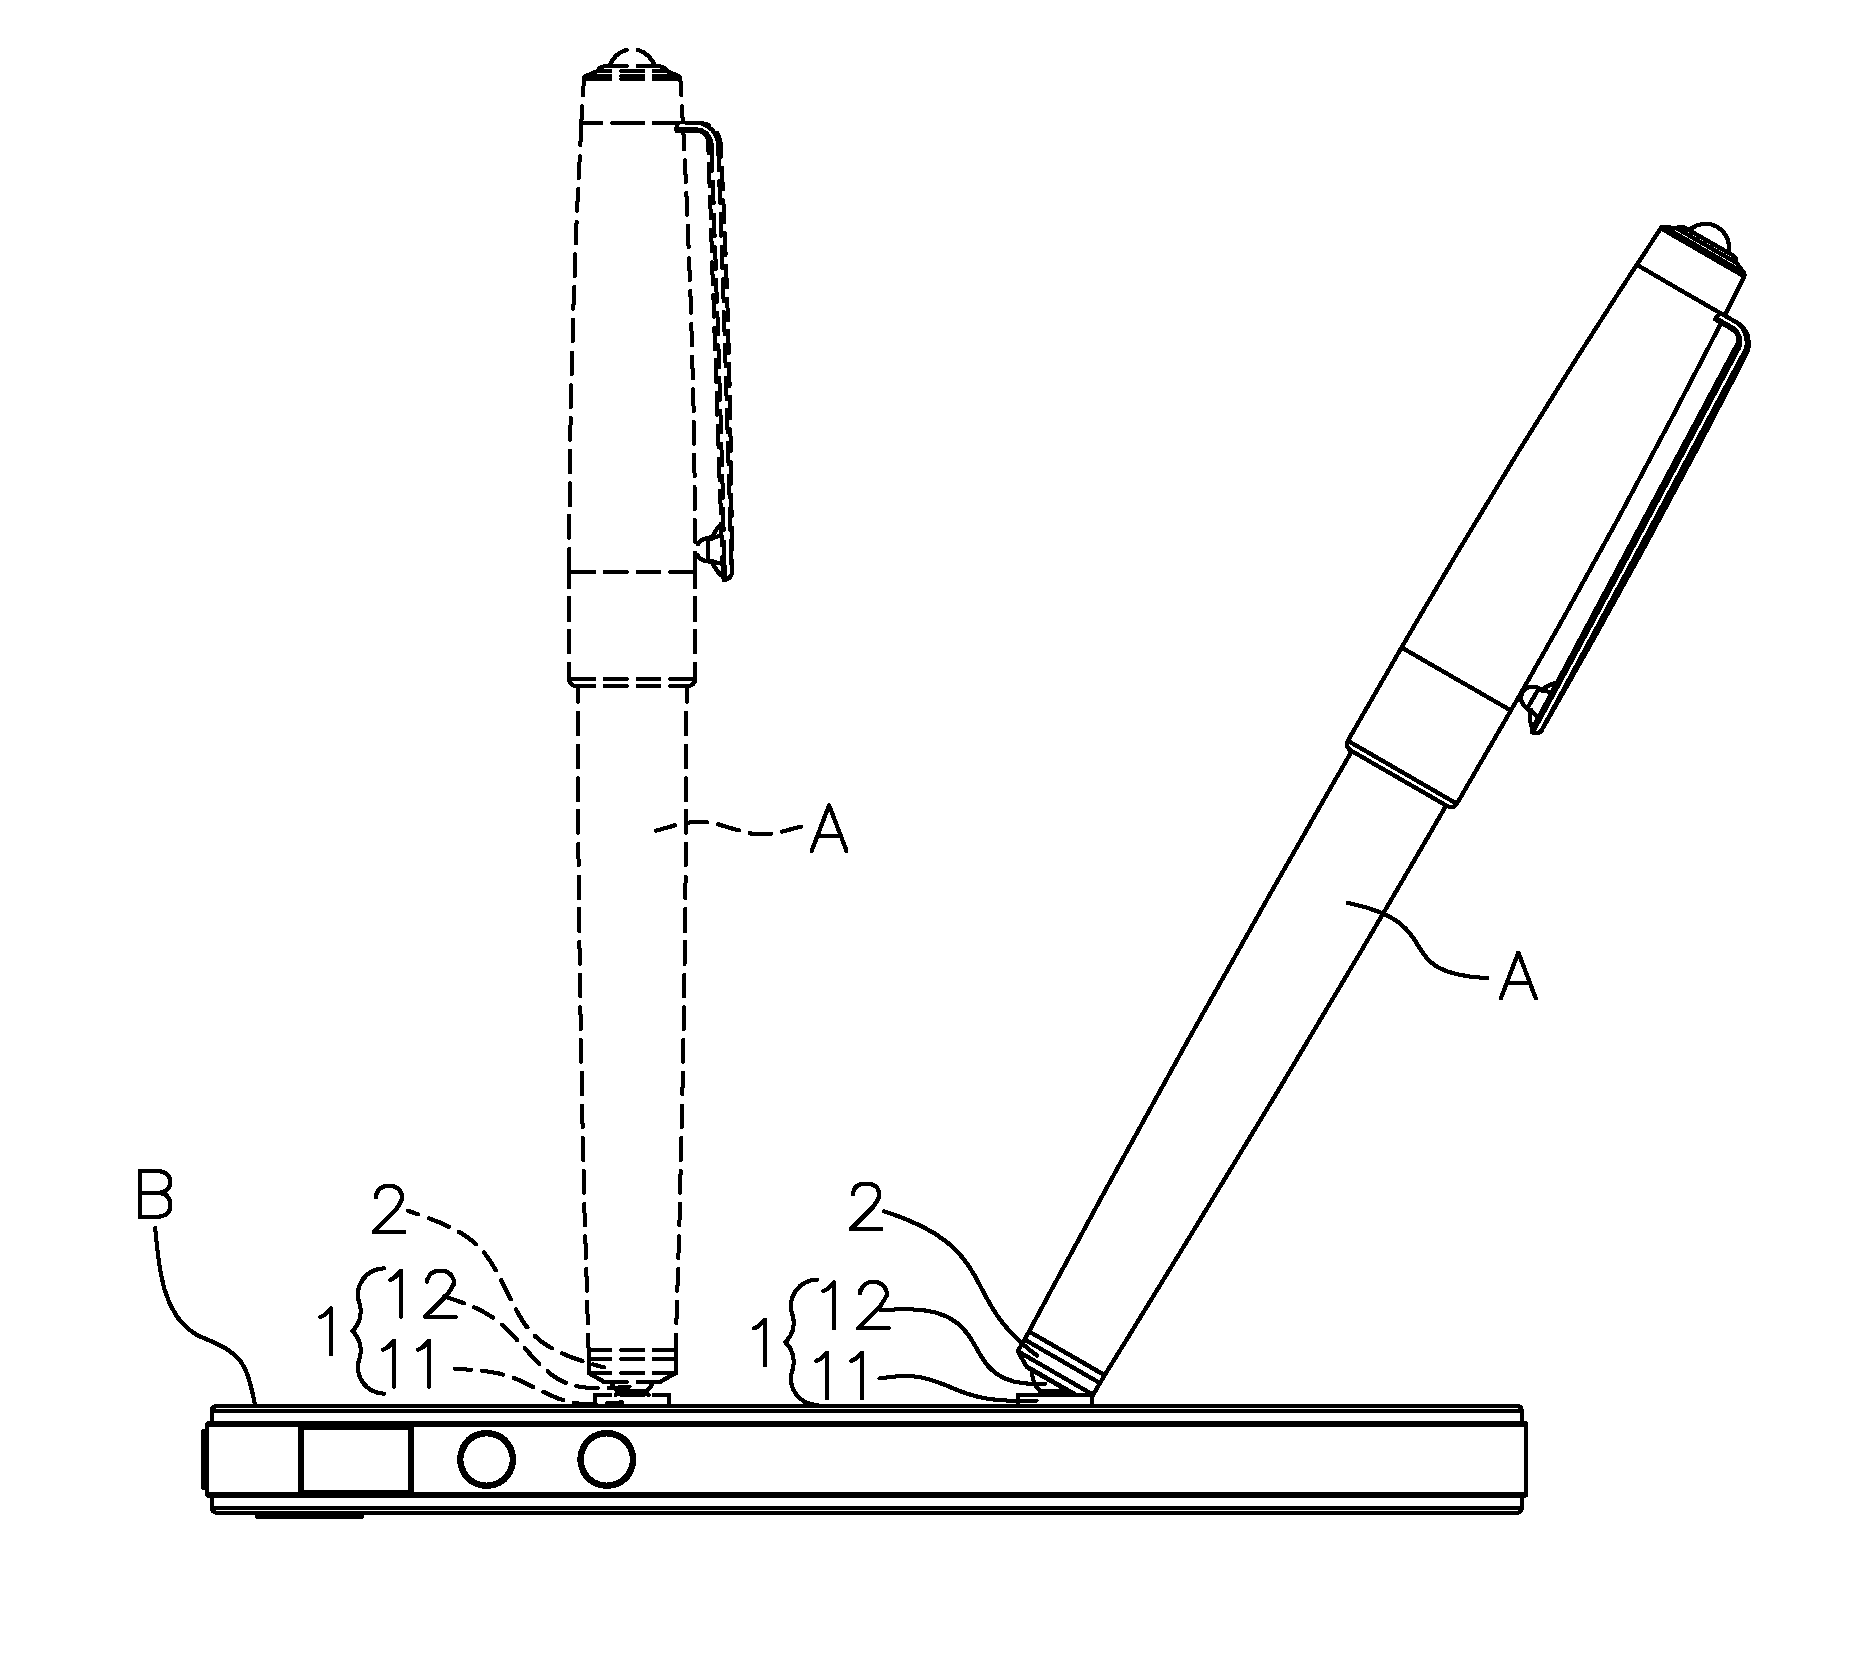 Pen head configuration structure for capacitive touch-screen stylus pen